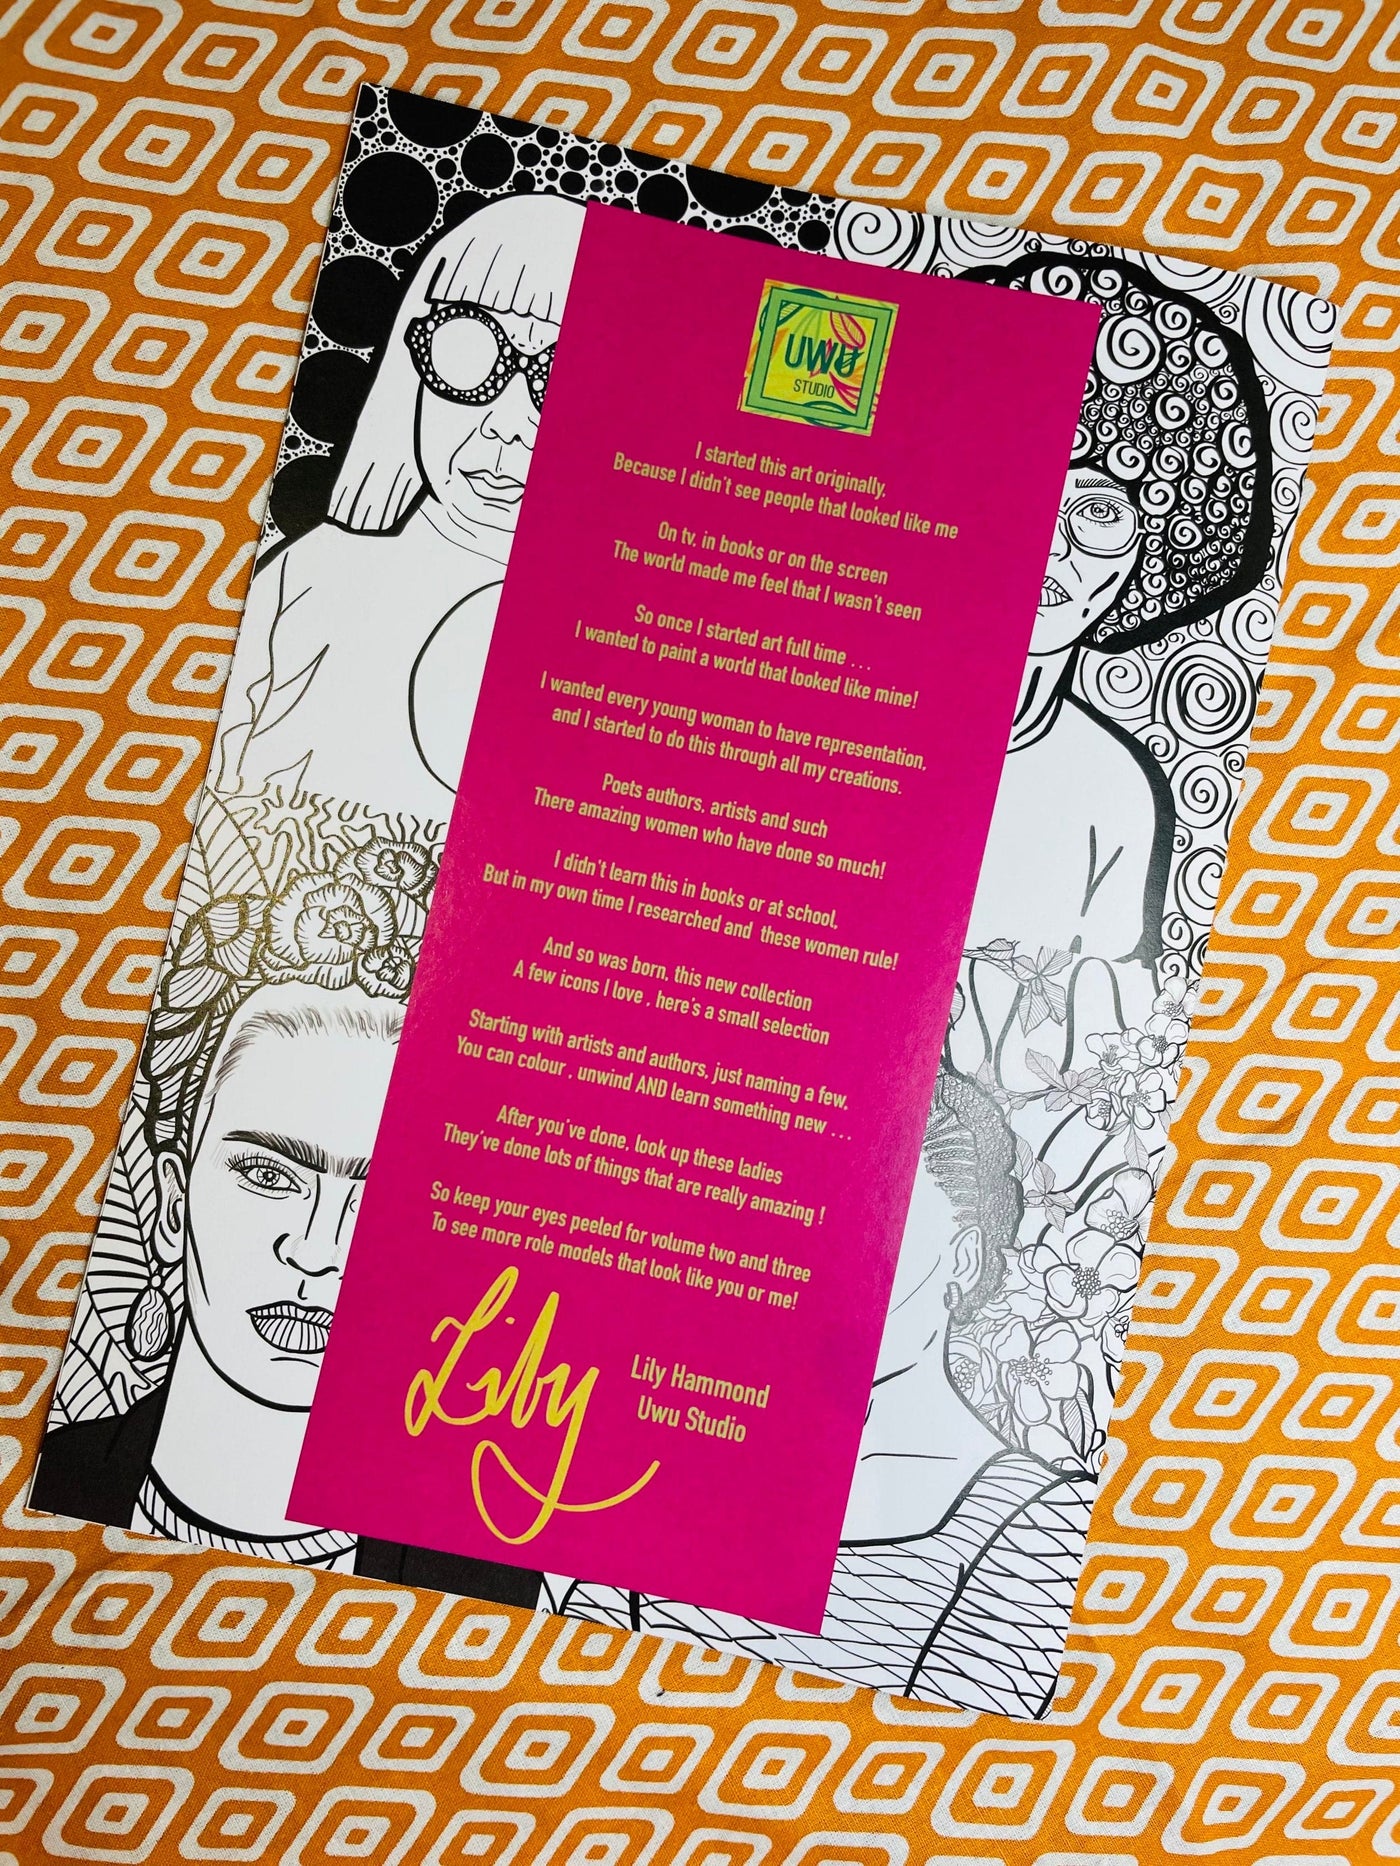 Inspirational Women Colouring Book by Uwu Studio - Artists & Authors